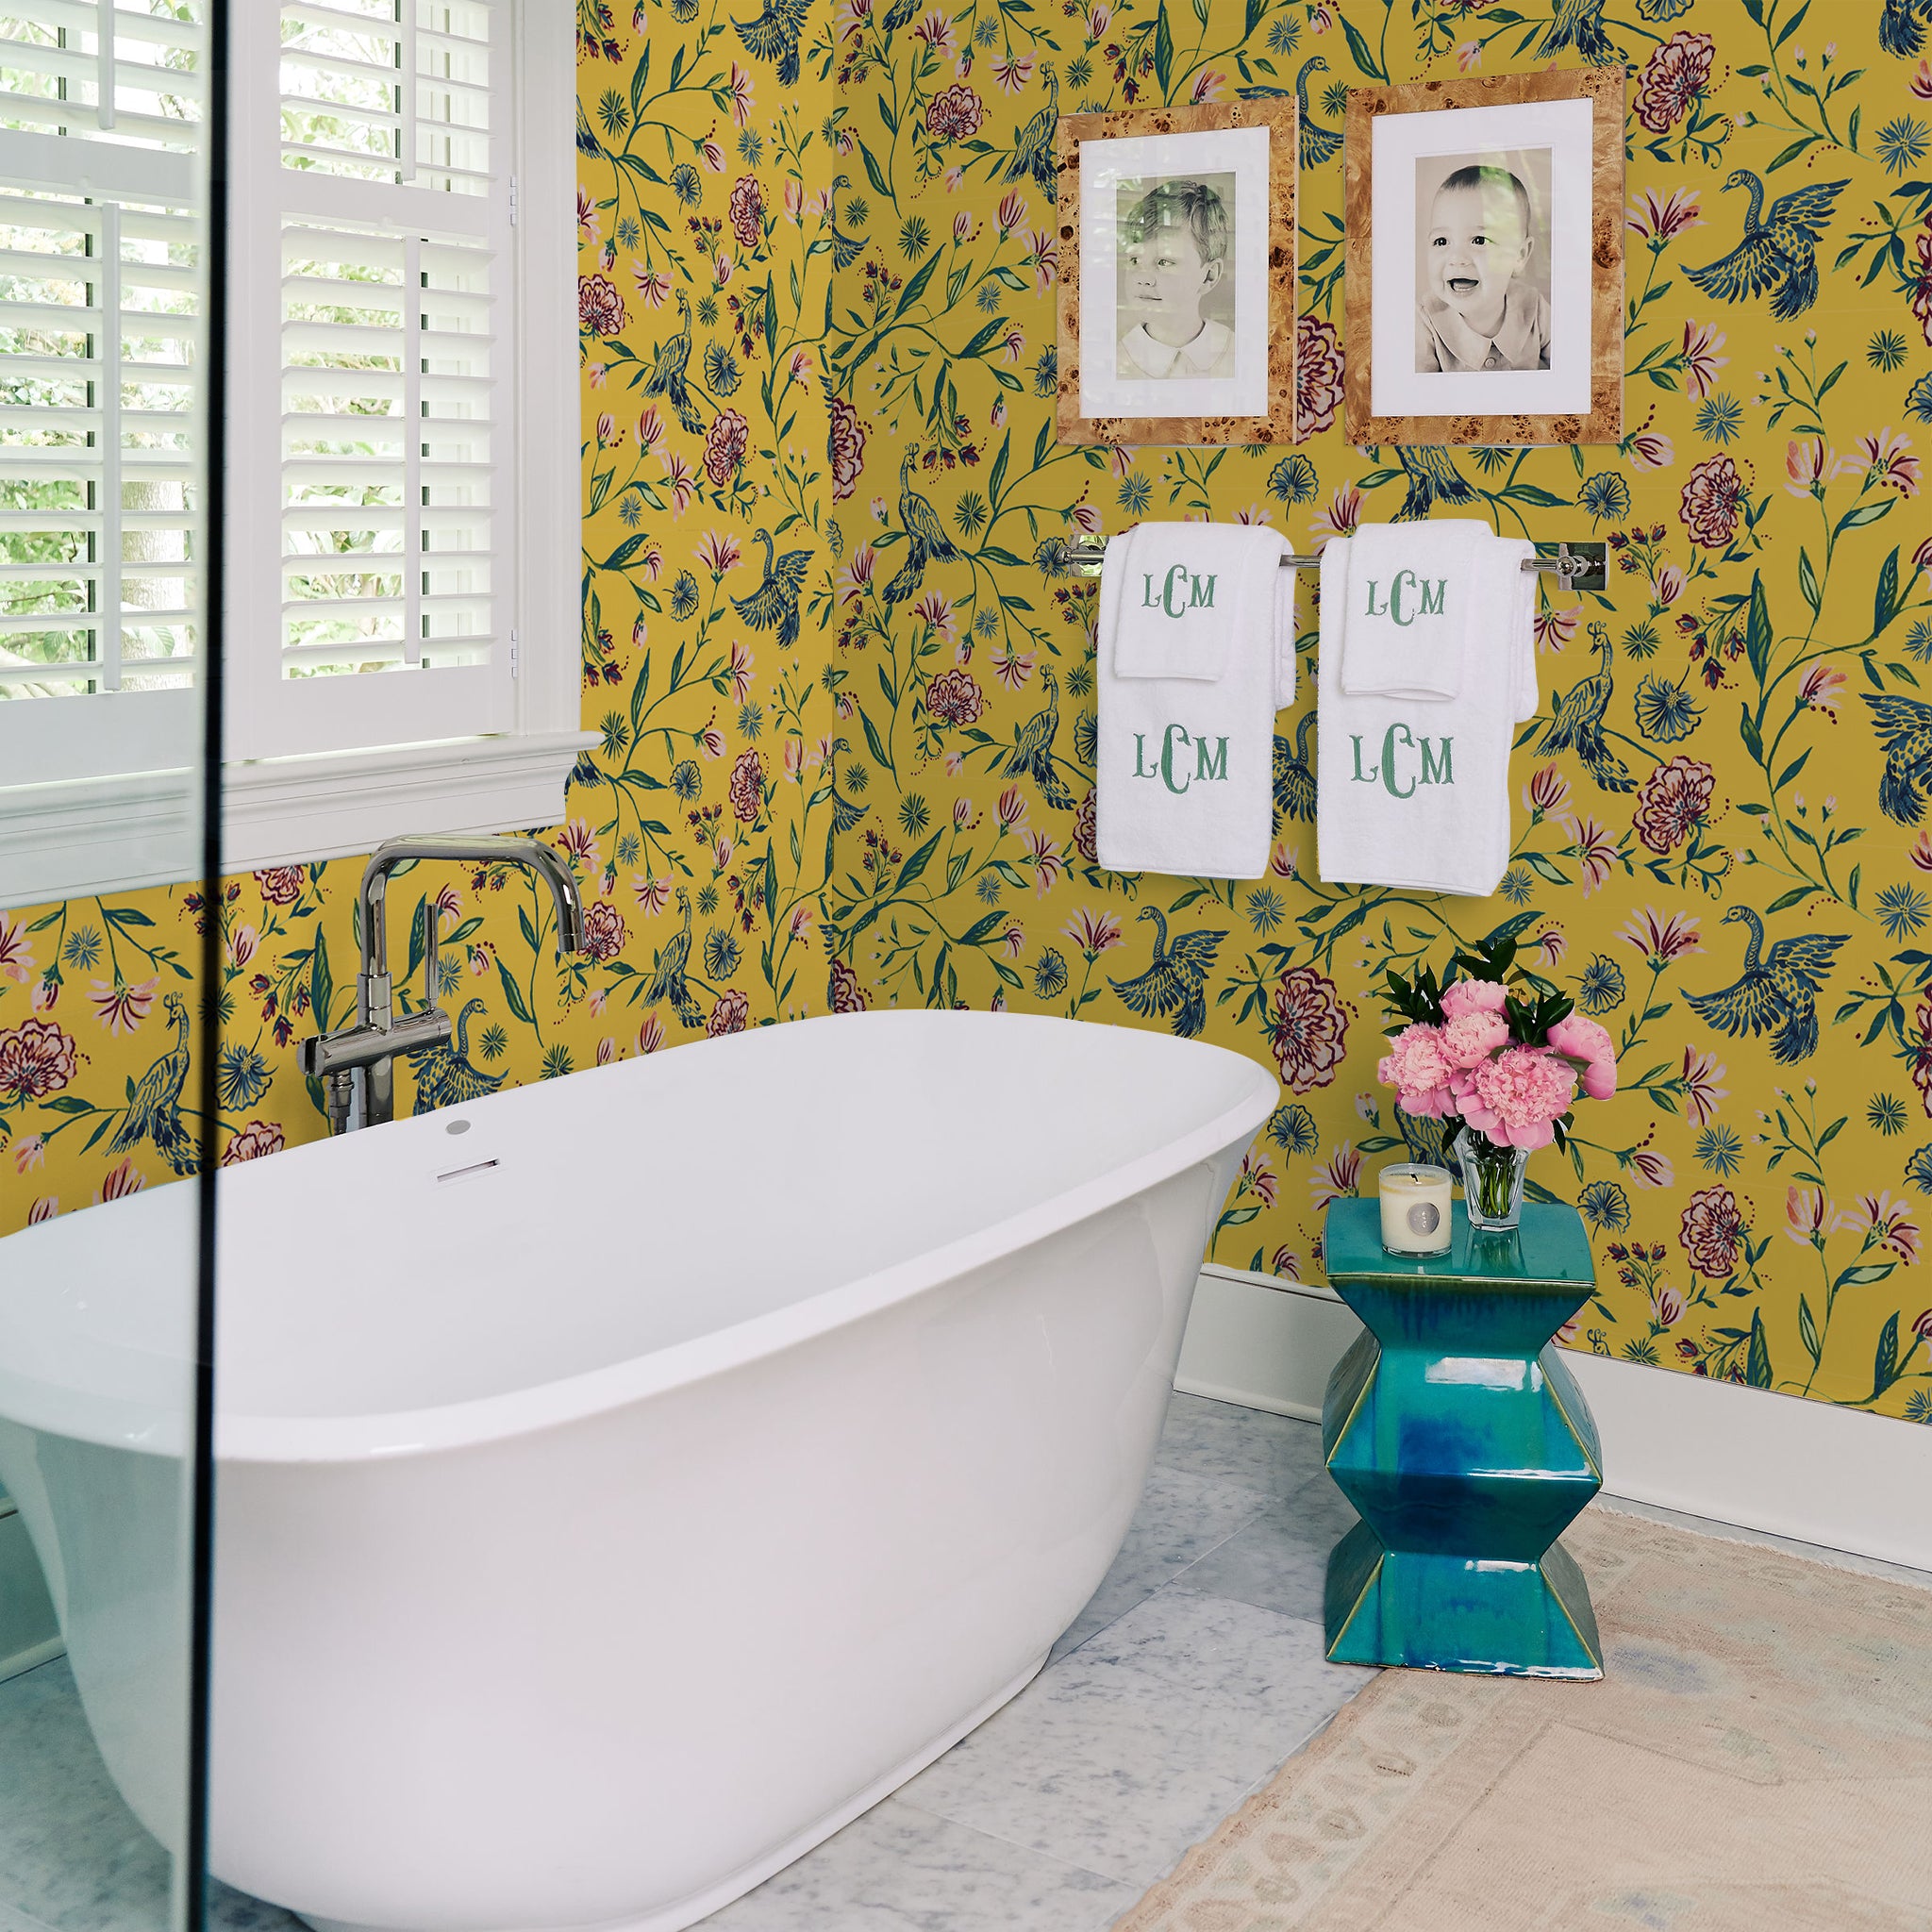 Bathroom styled with Yellow Canary printed wallpaper with white bath tub and two photo frames hanging from wall on top of the hanging monogrammed towels